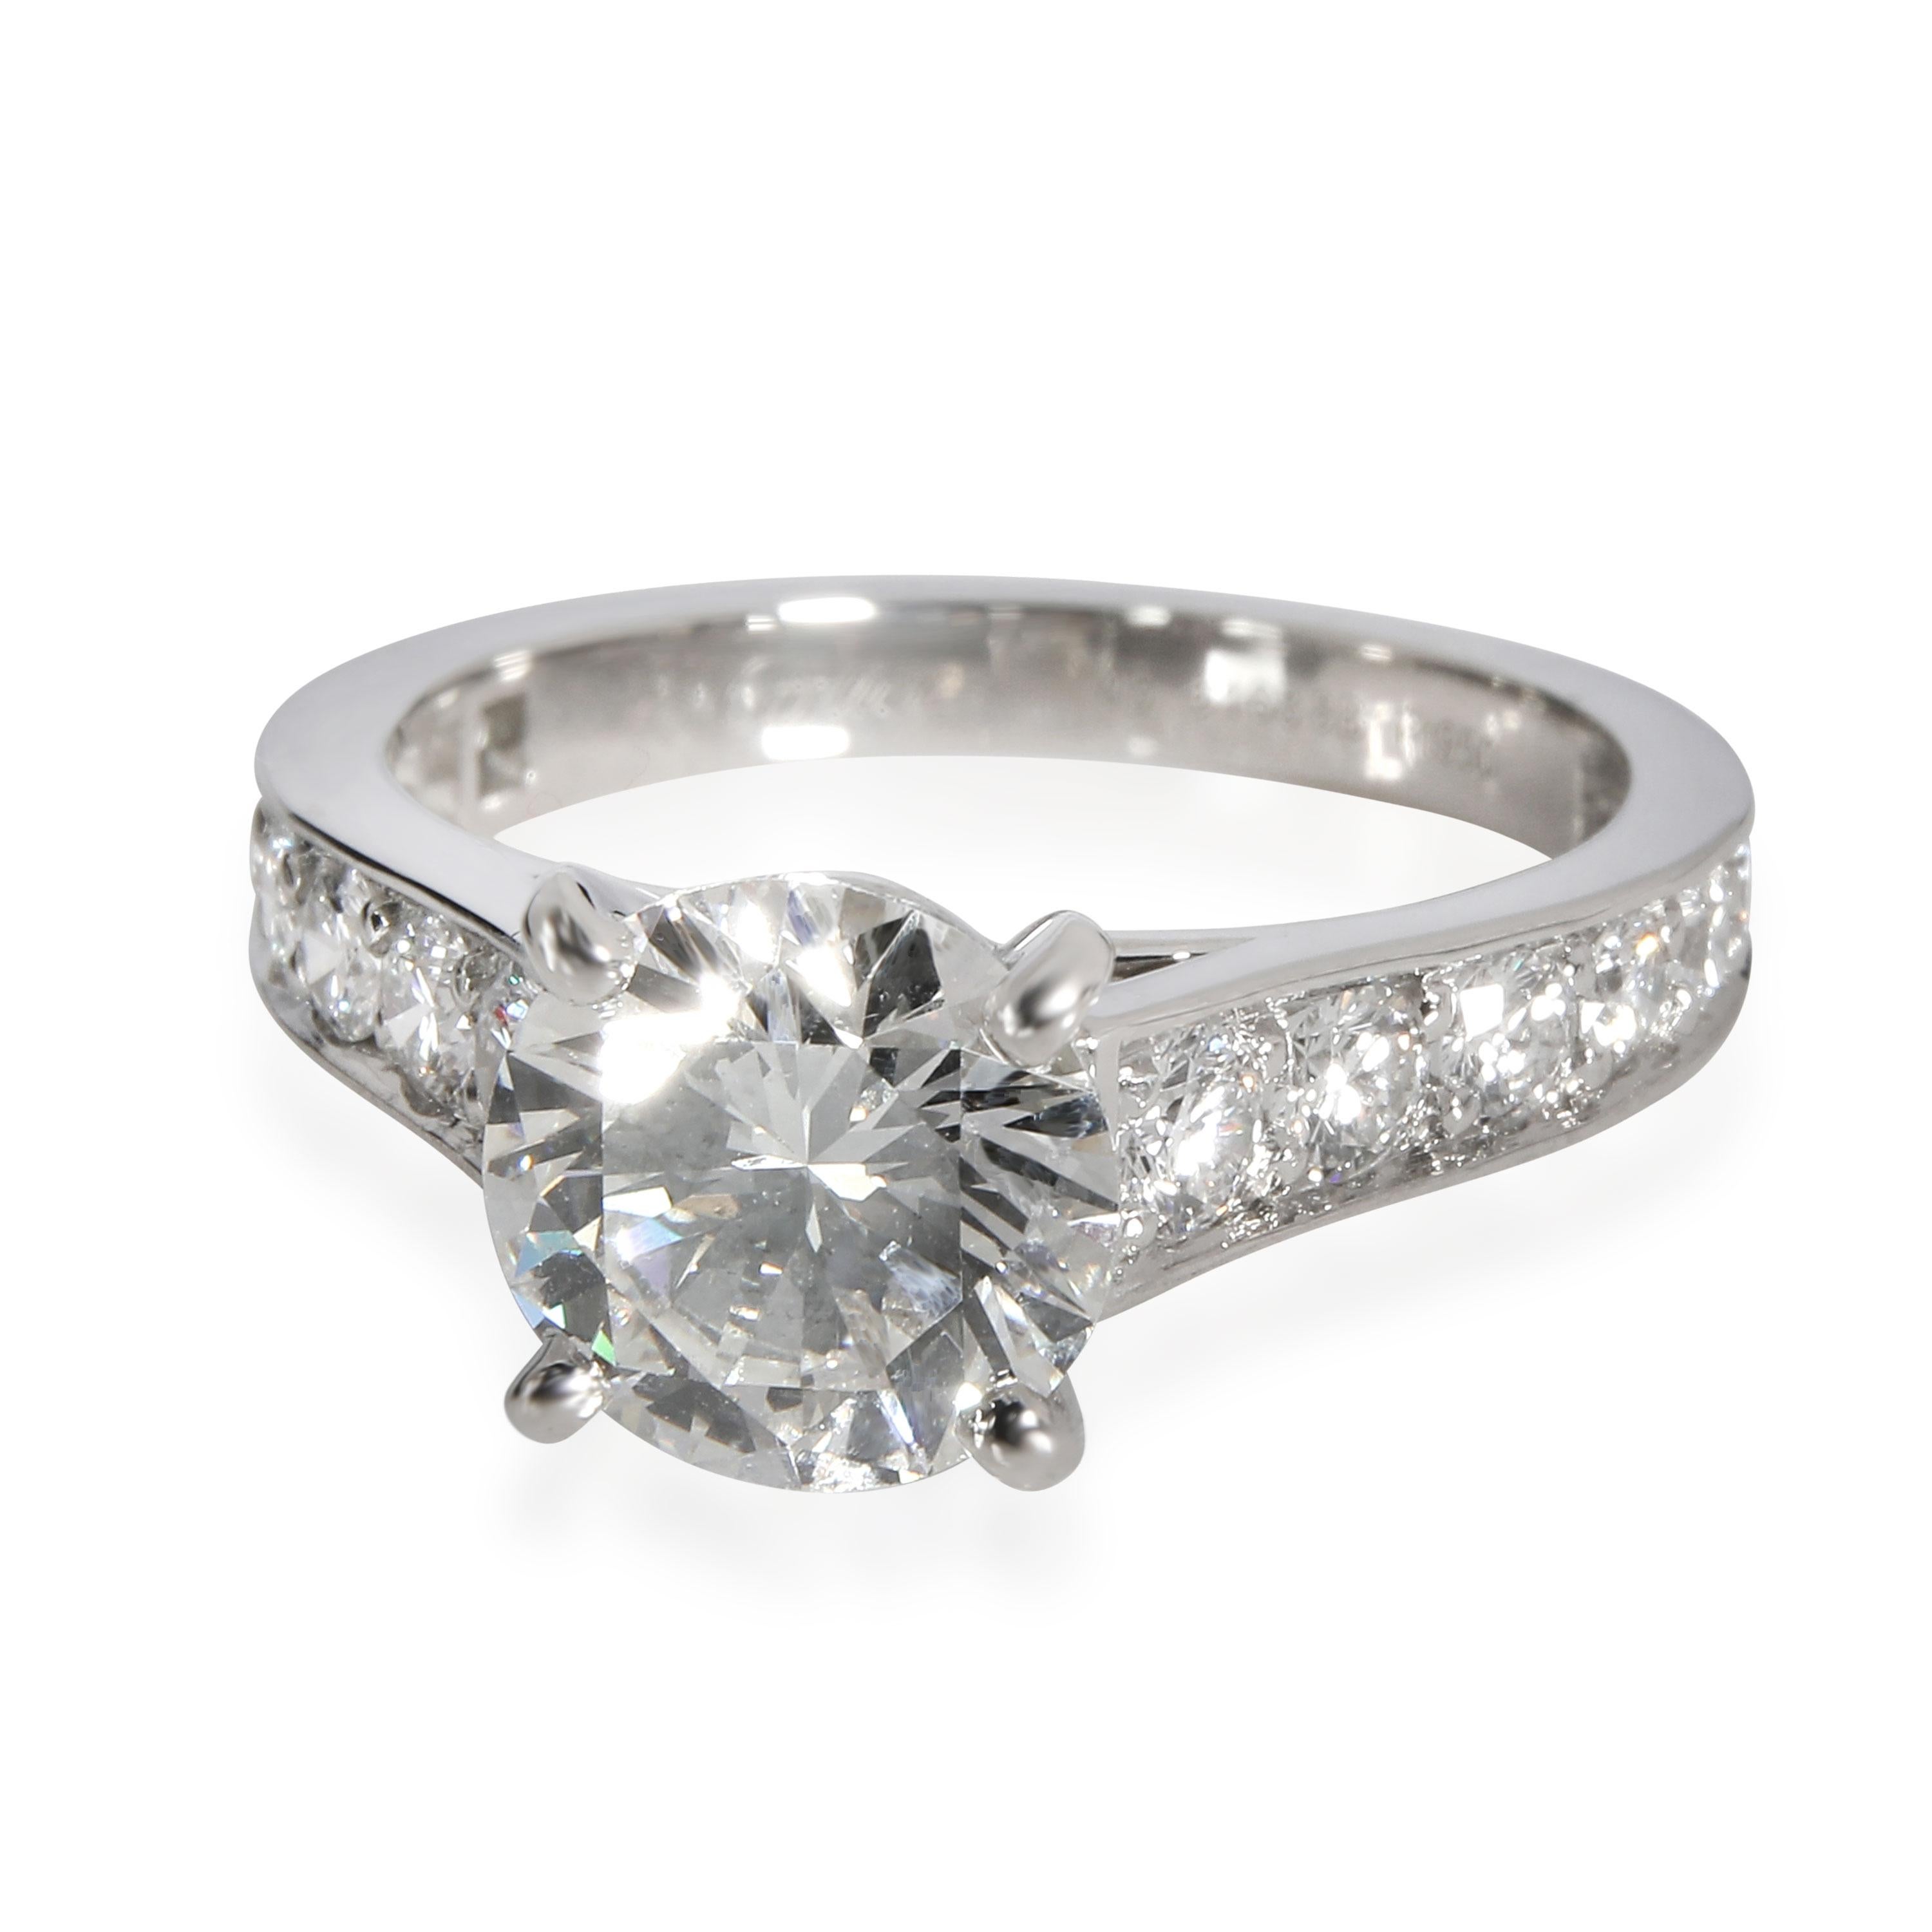 Cartier 1895 Diamond Engagement Ring in Platinum H VS1 2.19 CTW

PRIMARY DETAILS
SKU: 108210
Listing Title: Cartier 1895 Diamond Engagement Ring in Platinum H VS1 2.19 CTW
Condition Description: Retails for 45,500 USD. In excellent condition and